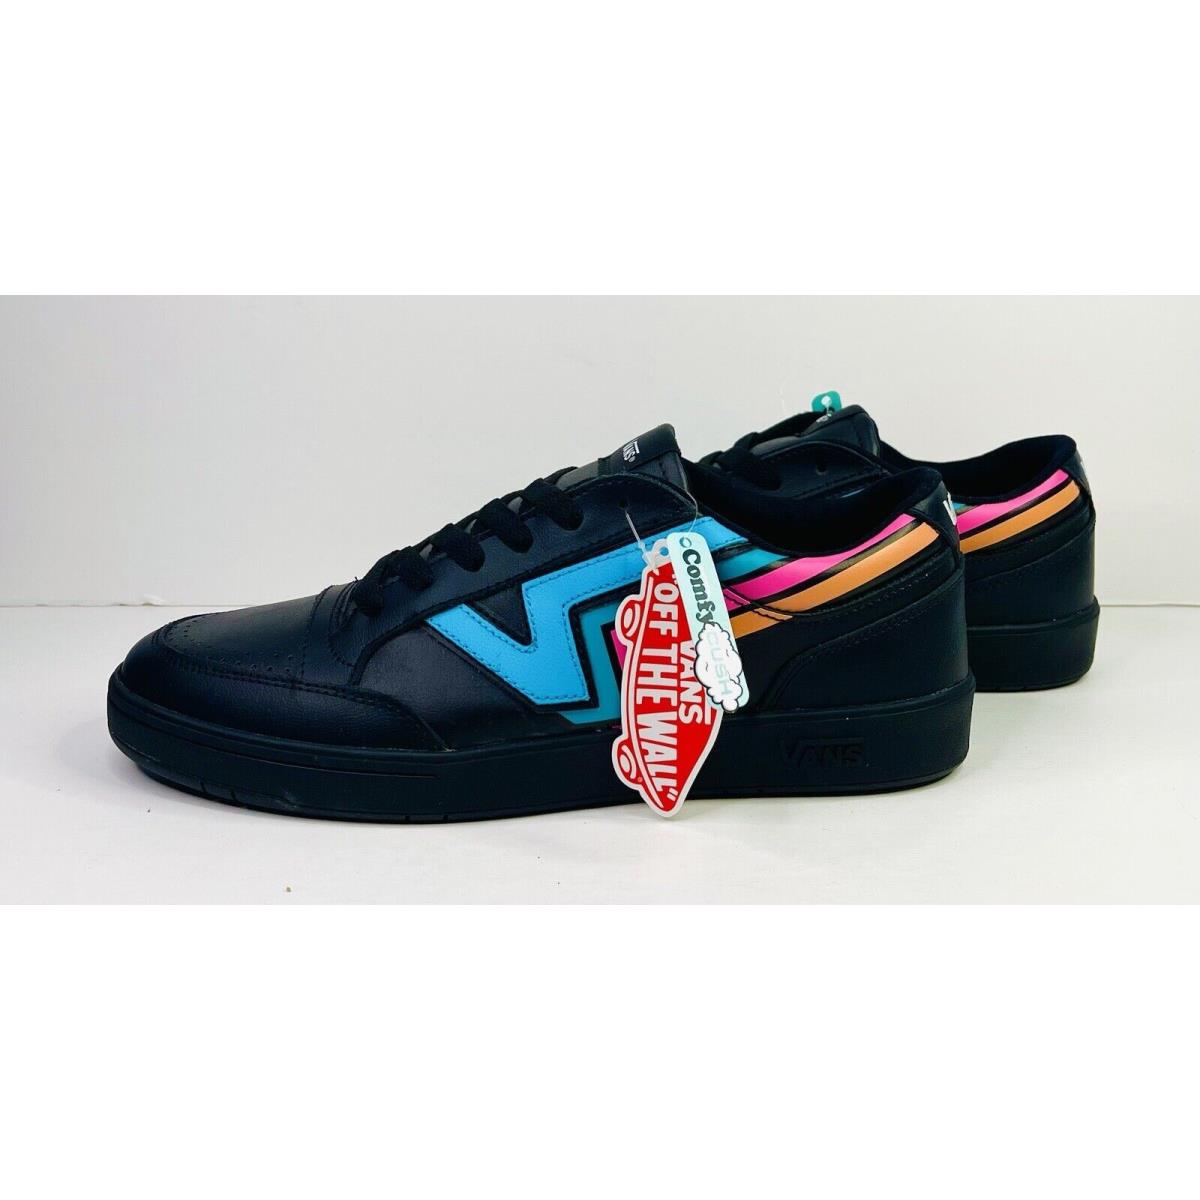 Vans Lowland Cc Comfycush Fader Black Leather Sneakers Size 11.5